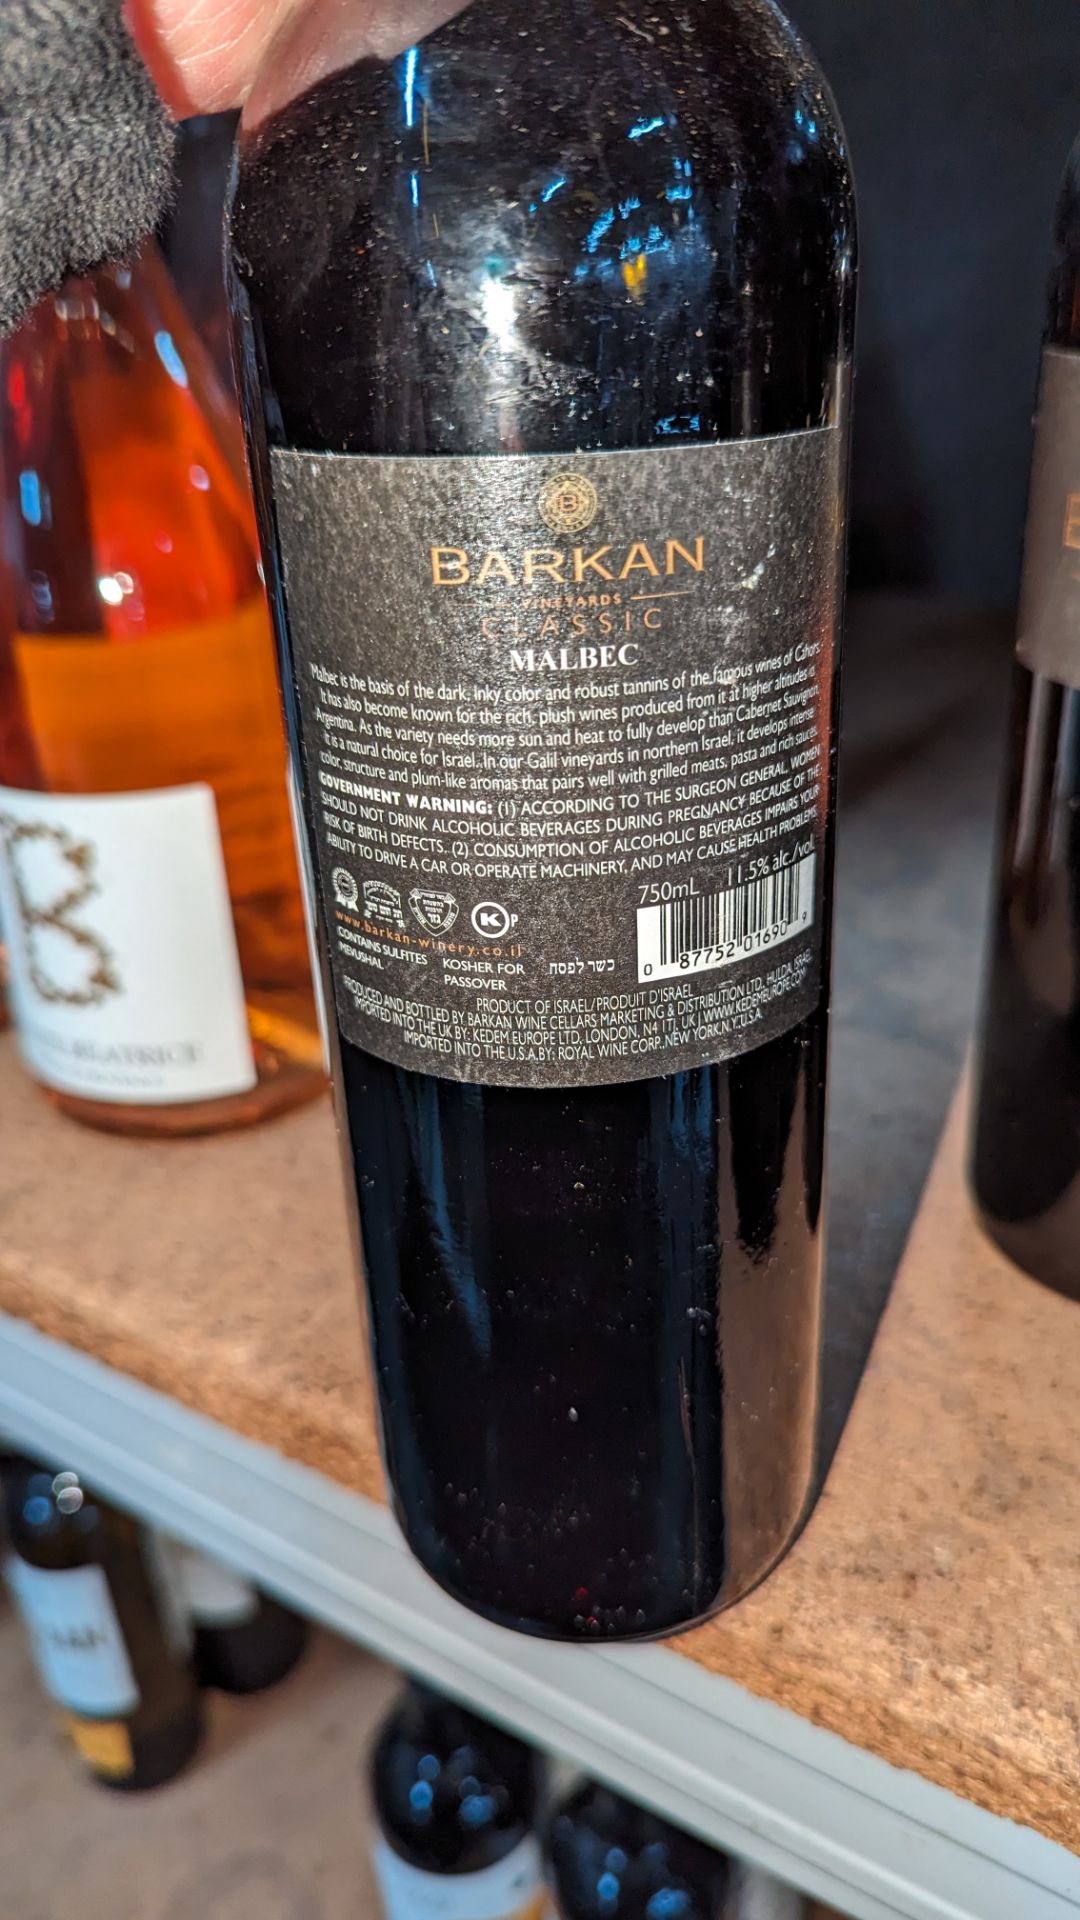 14 bottles of Barkan Vineyards Classic 2019 Malbec Israeli red wine sold under AWRS number XQAW00000 - Image 4 of 4